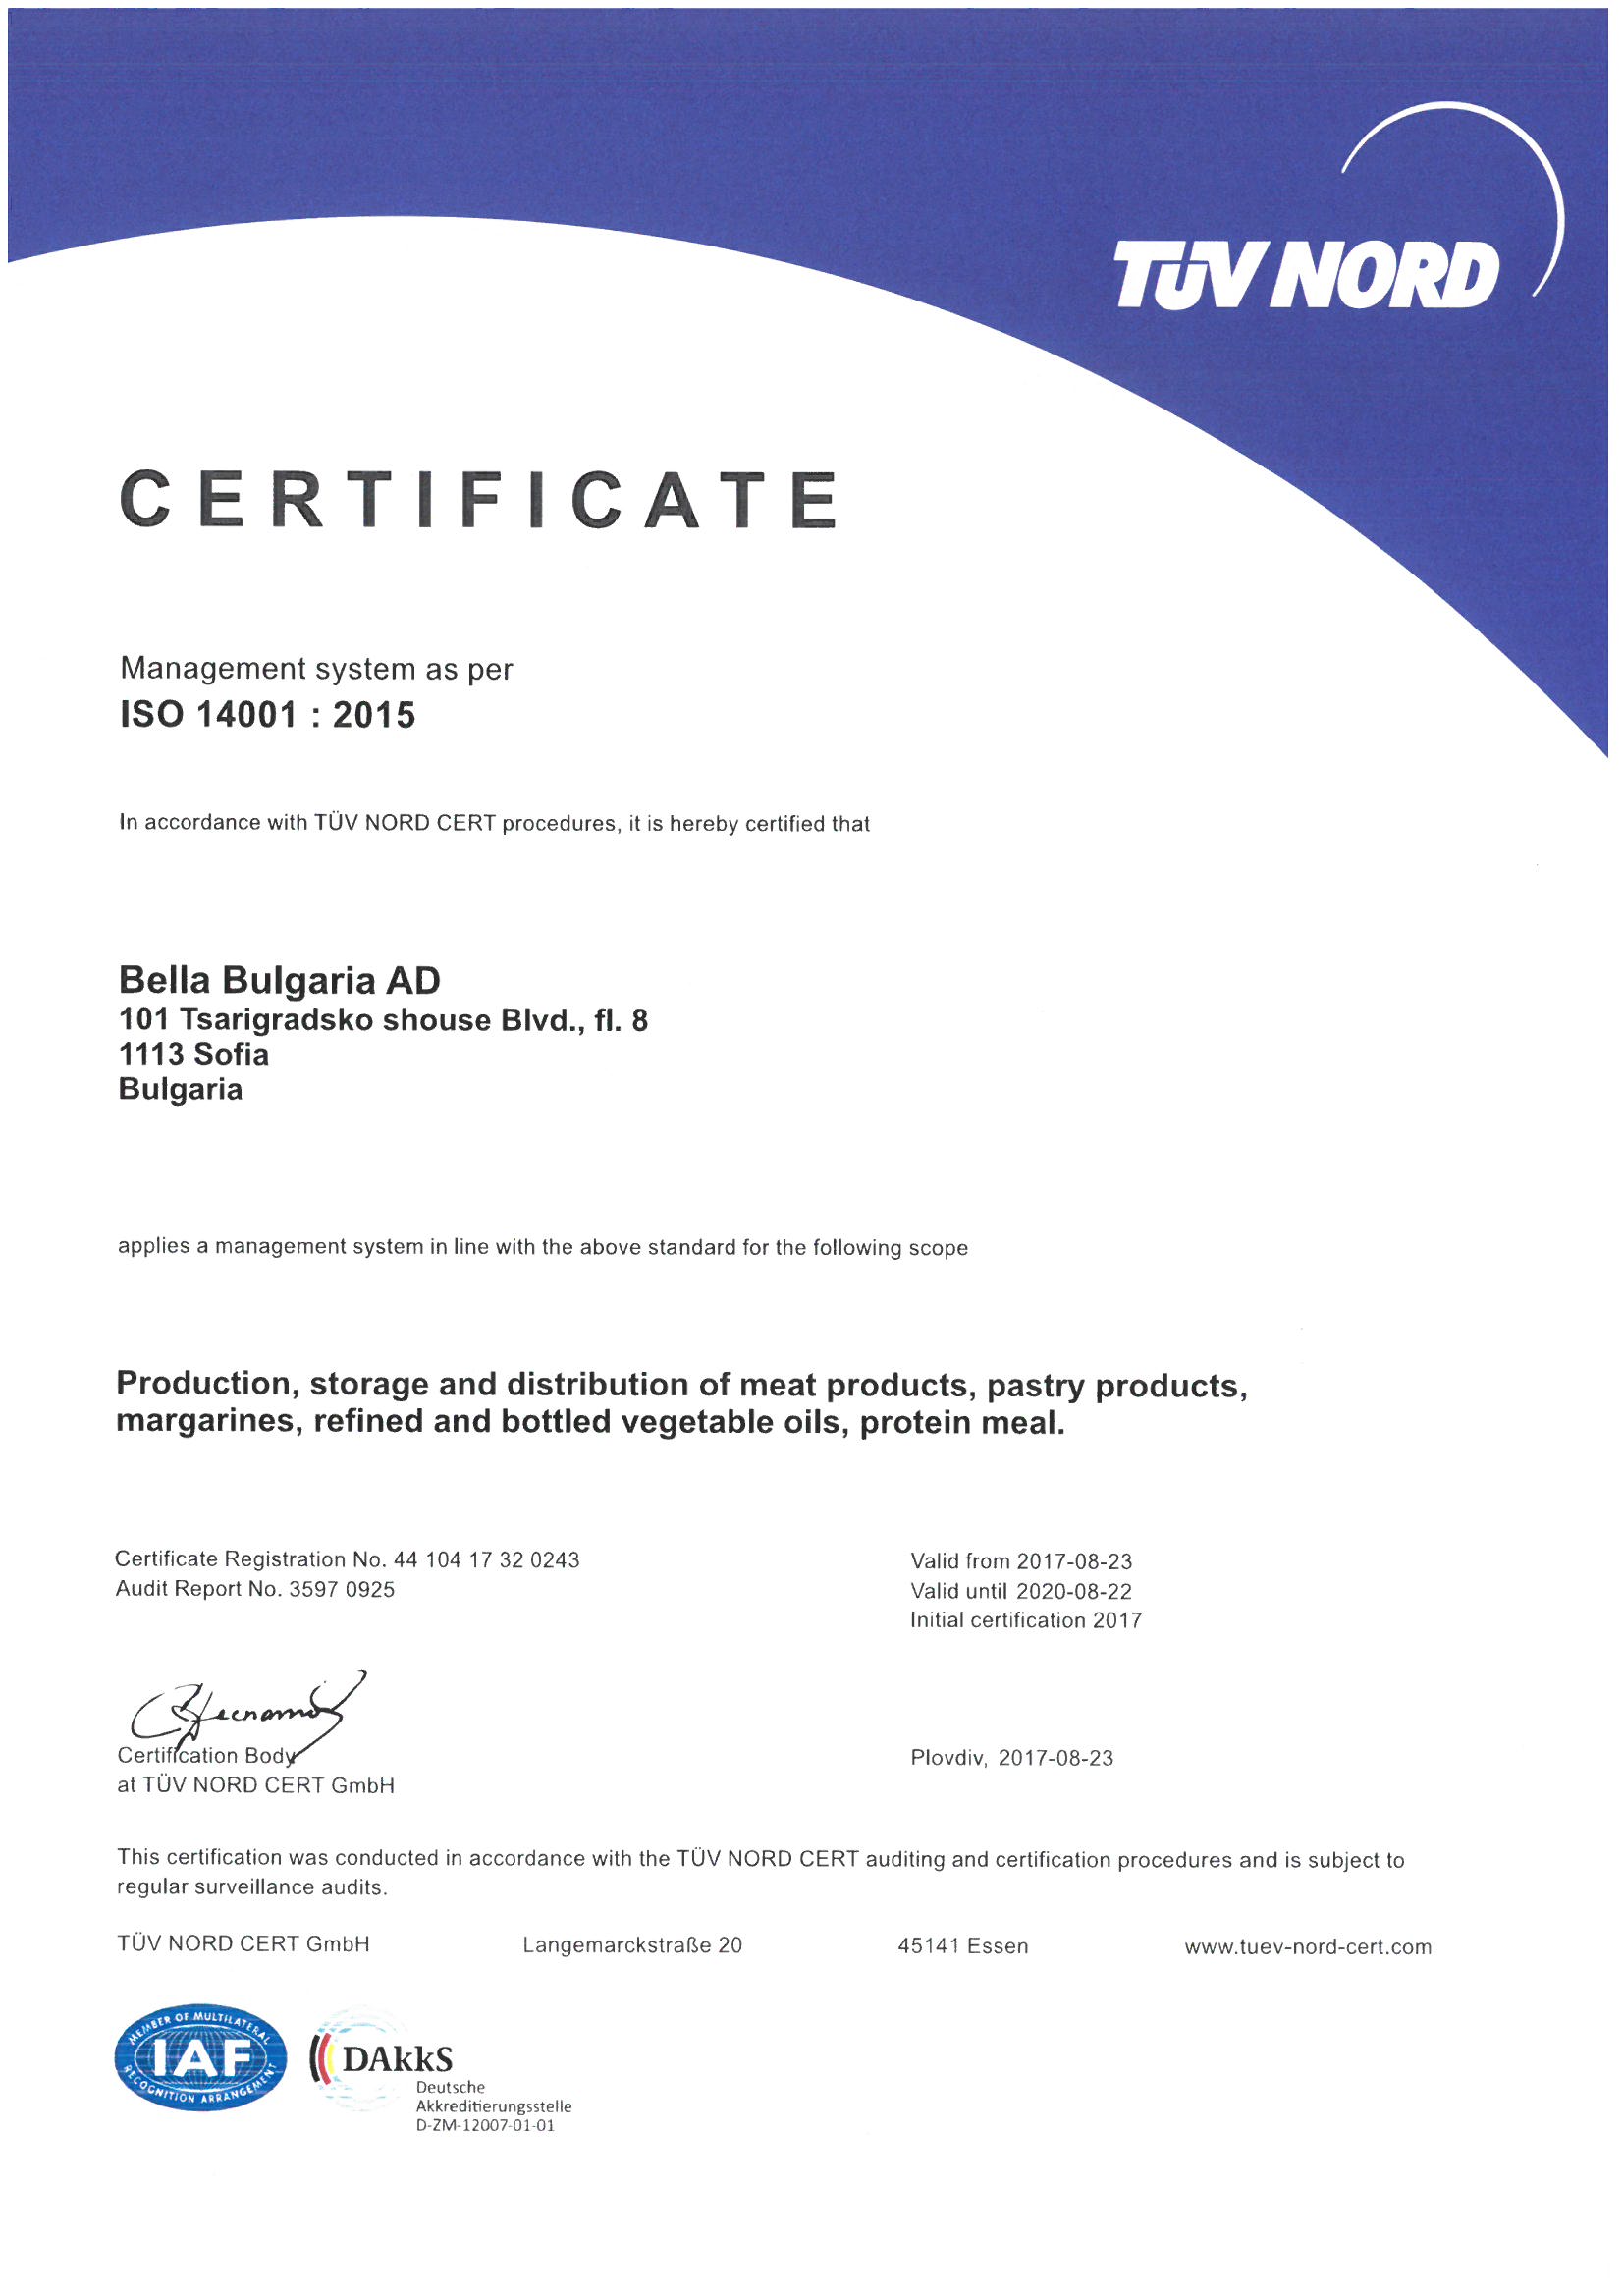 “Bella Bulgaria” has adopted an international environmental management system-ISO 14001:2015 